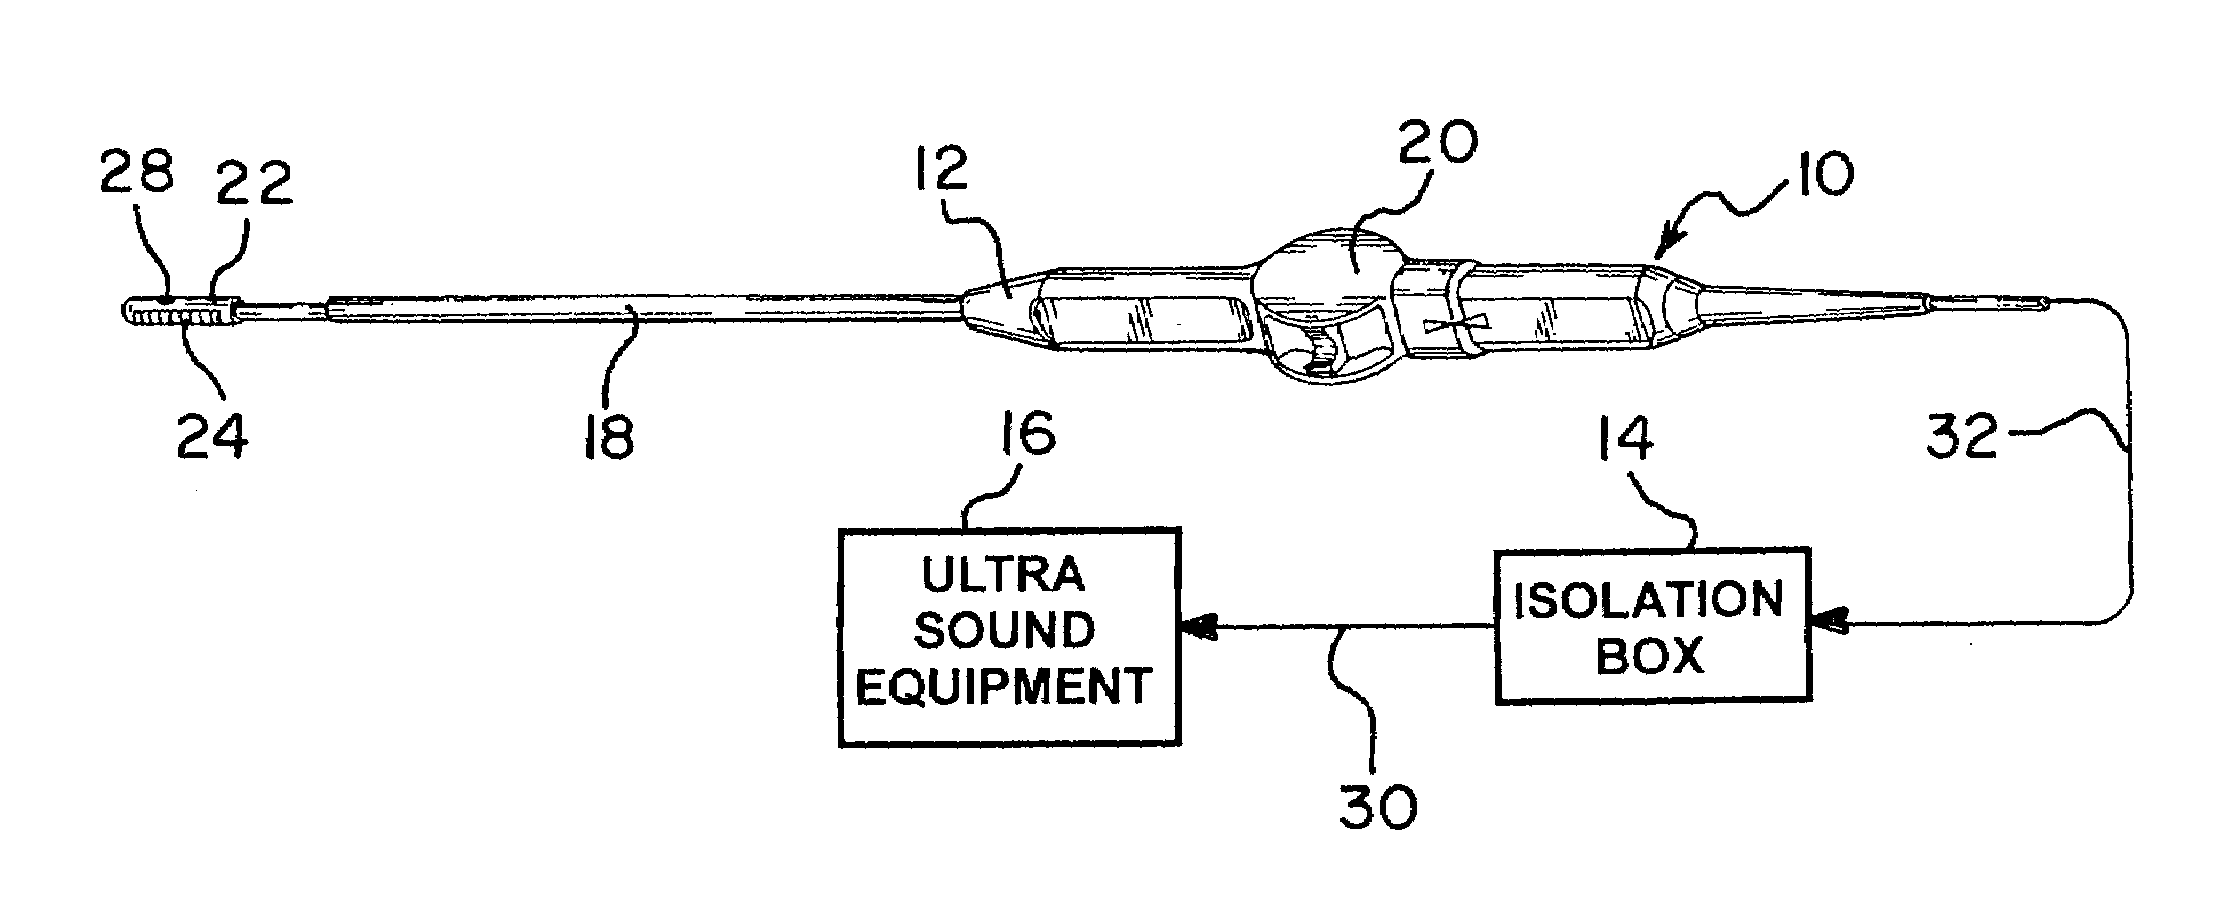 Ultrasound imaging catheter isolation system with temperature sensor